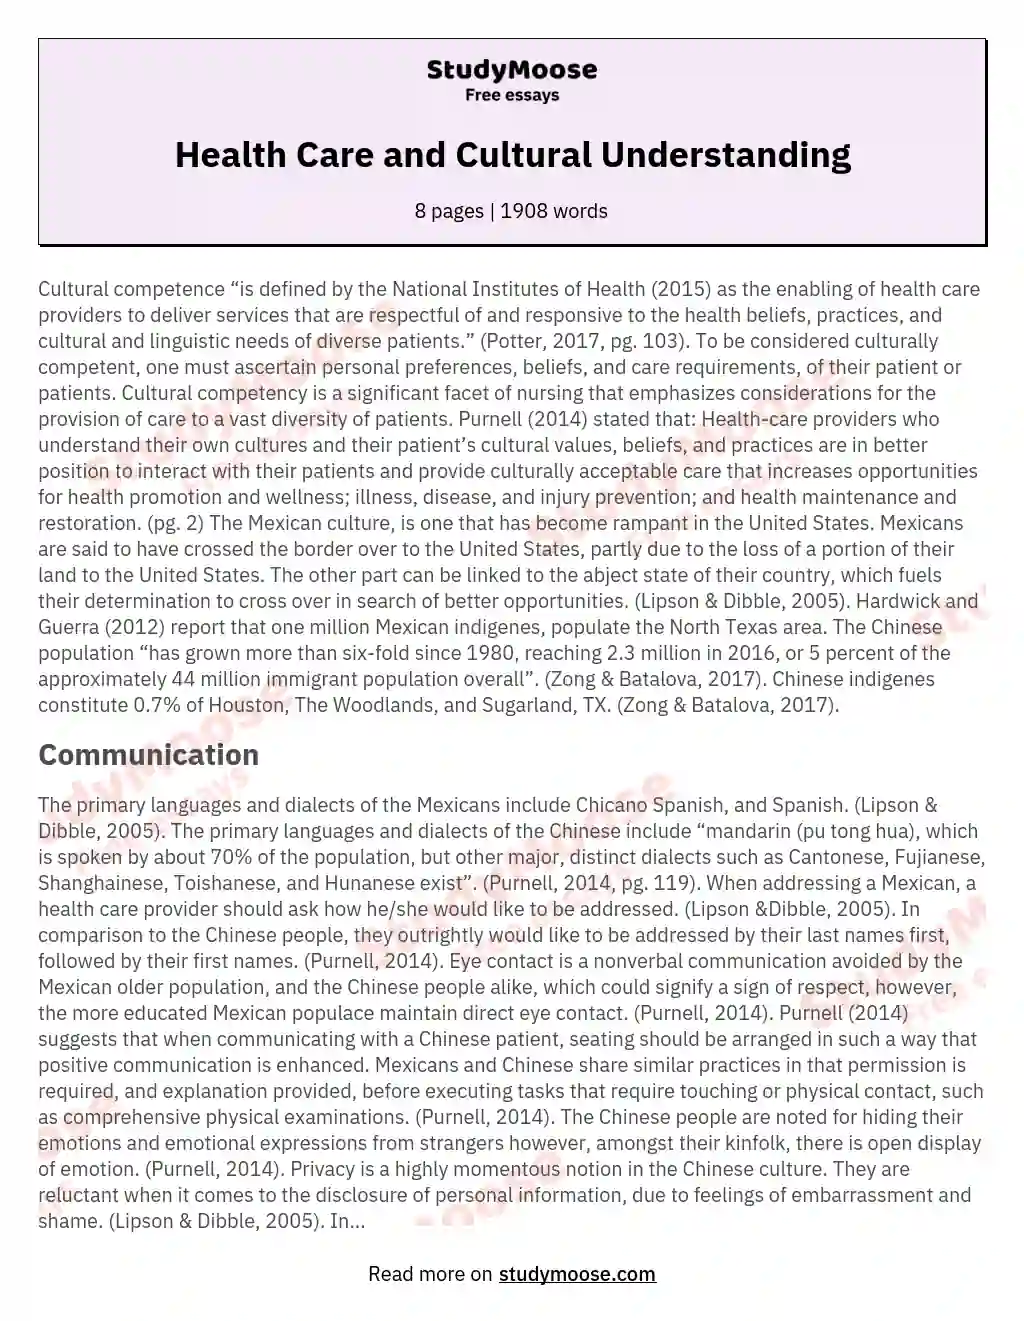 Health Care and Cultural Understanding essay